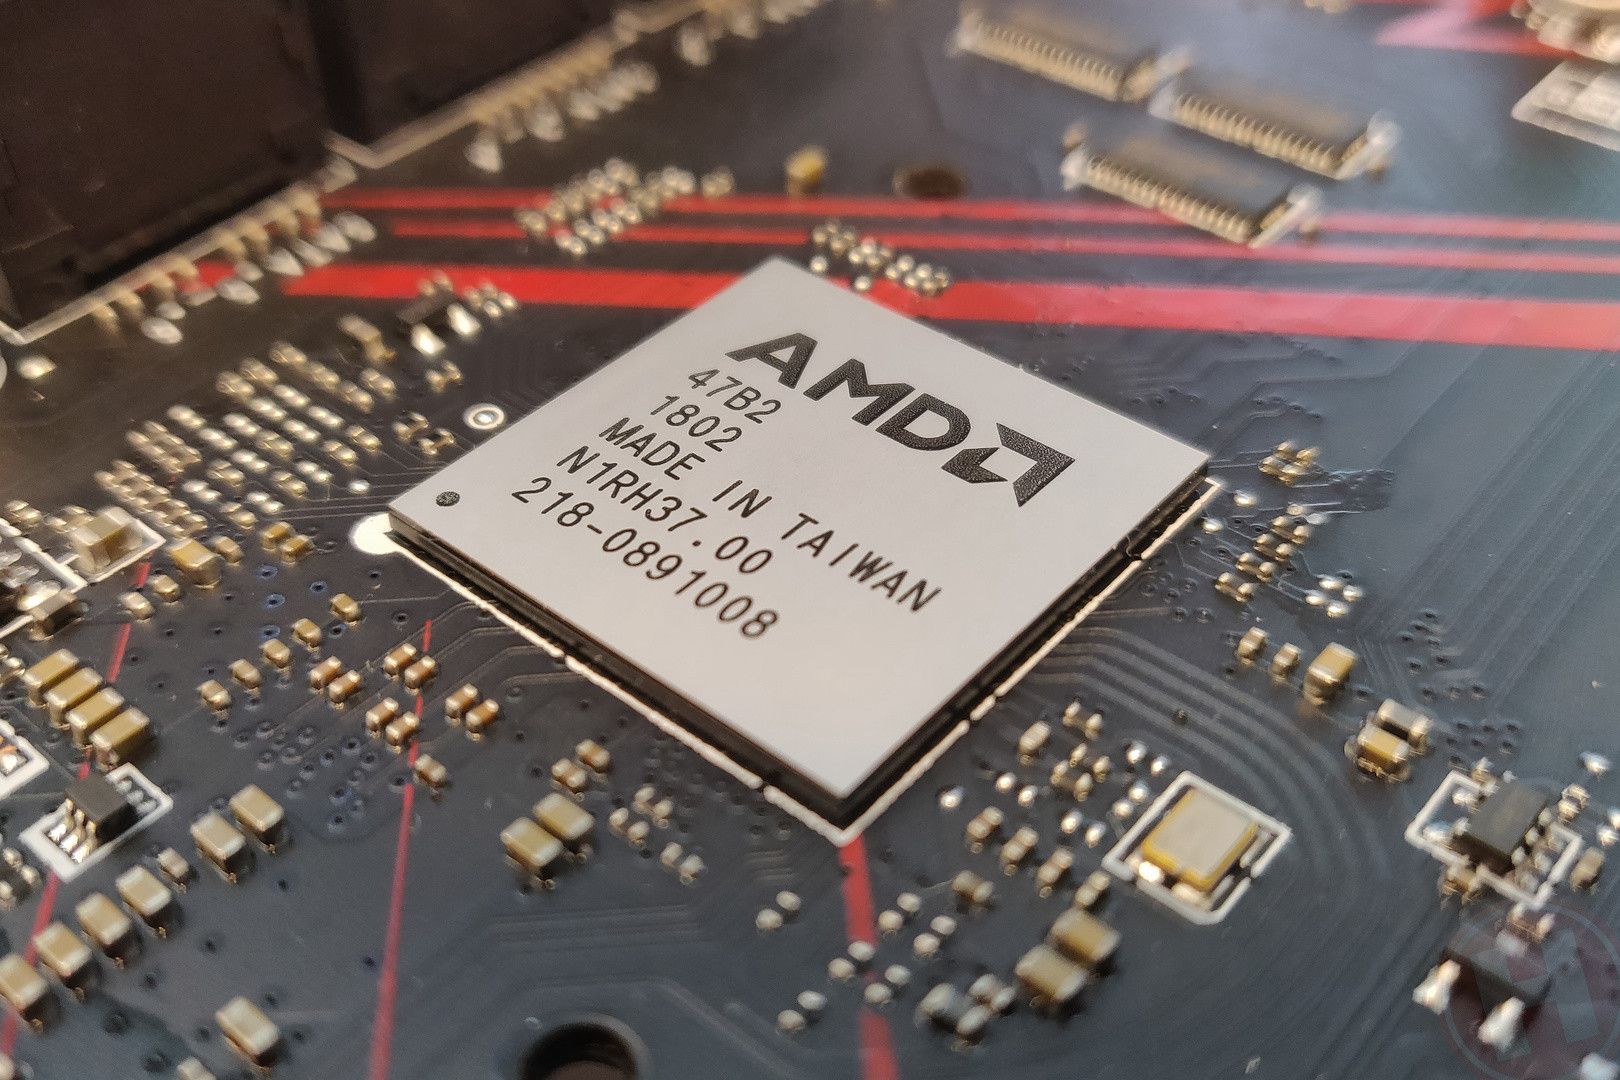 AMD B550 and A520 chipset motherboards from ASMedia are expected in 2020